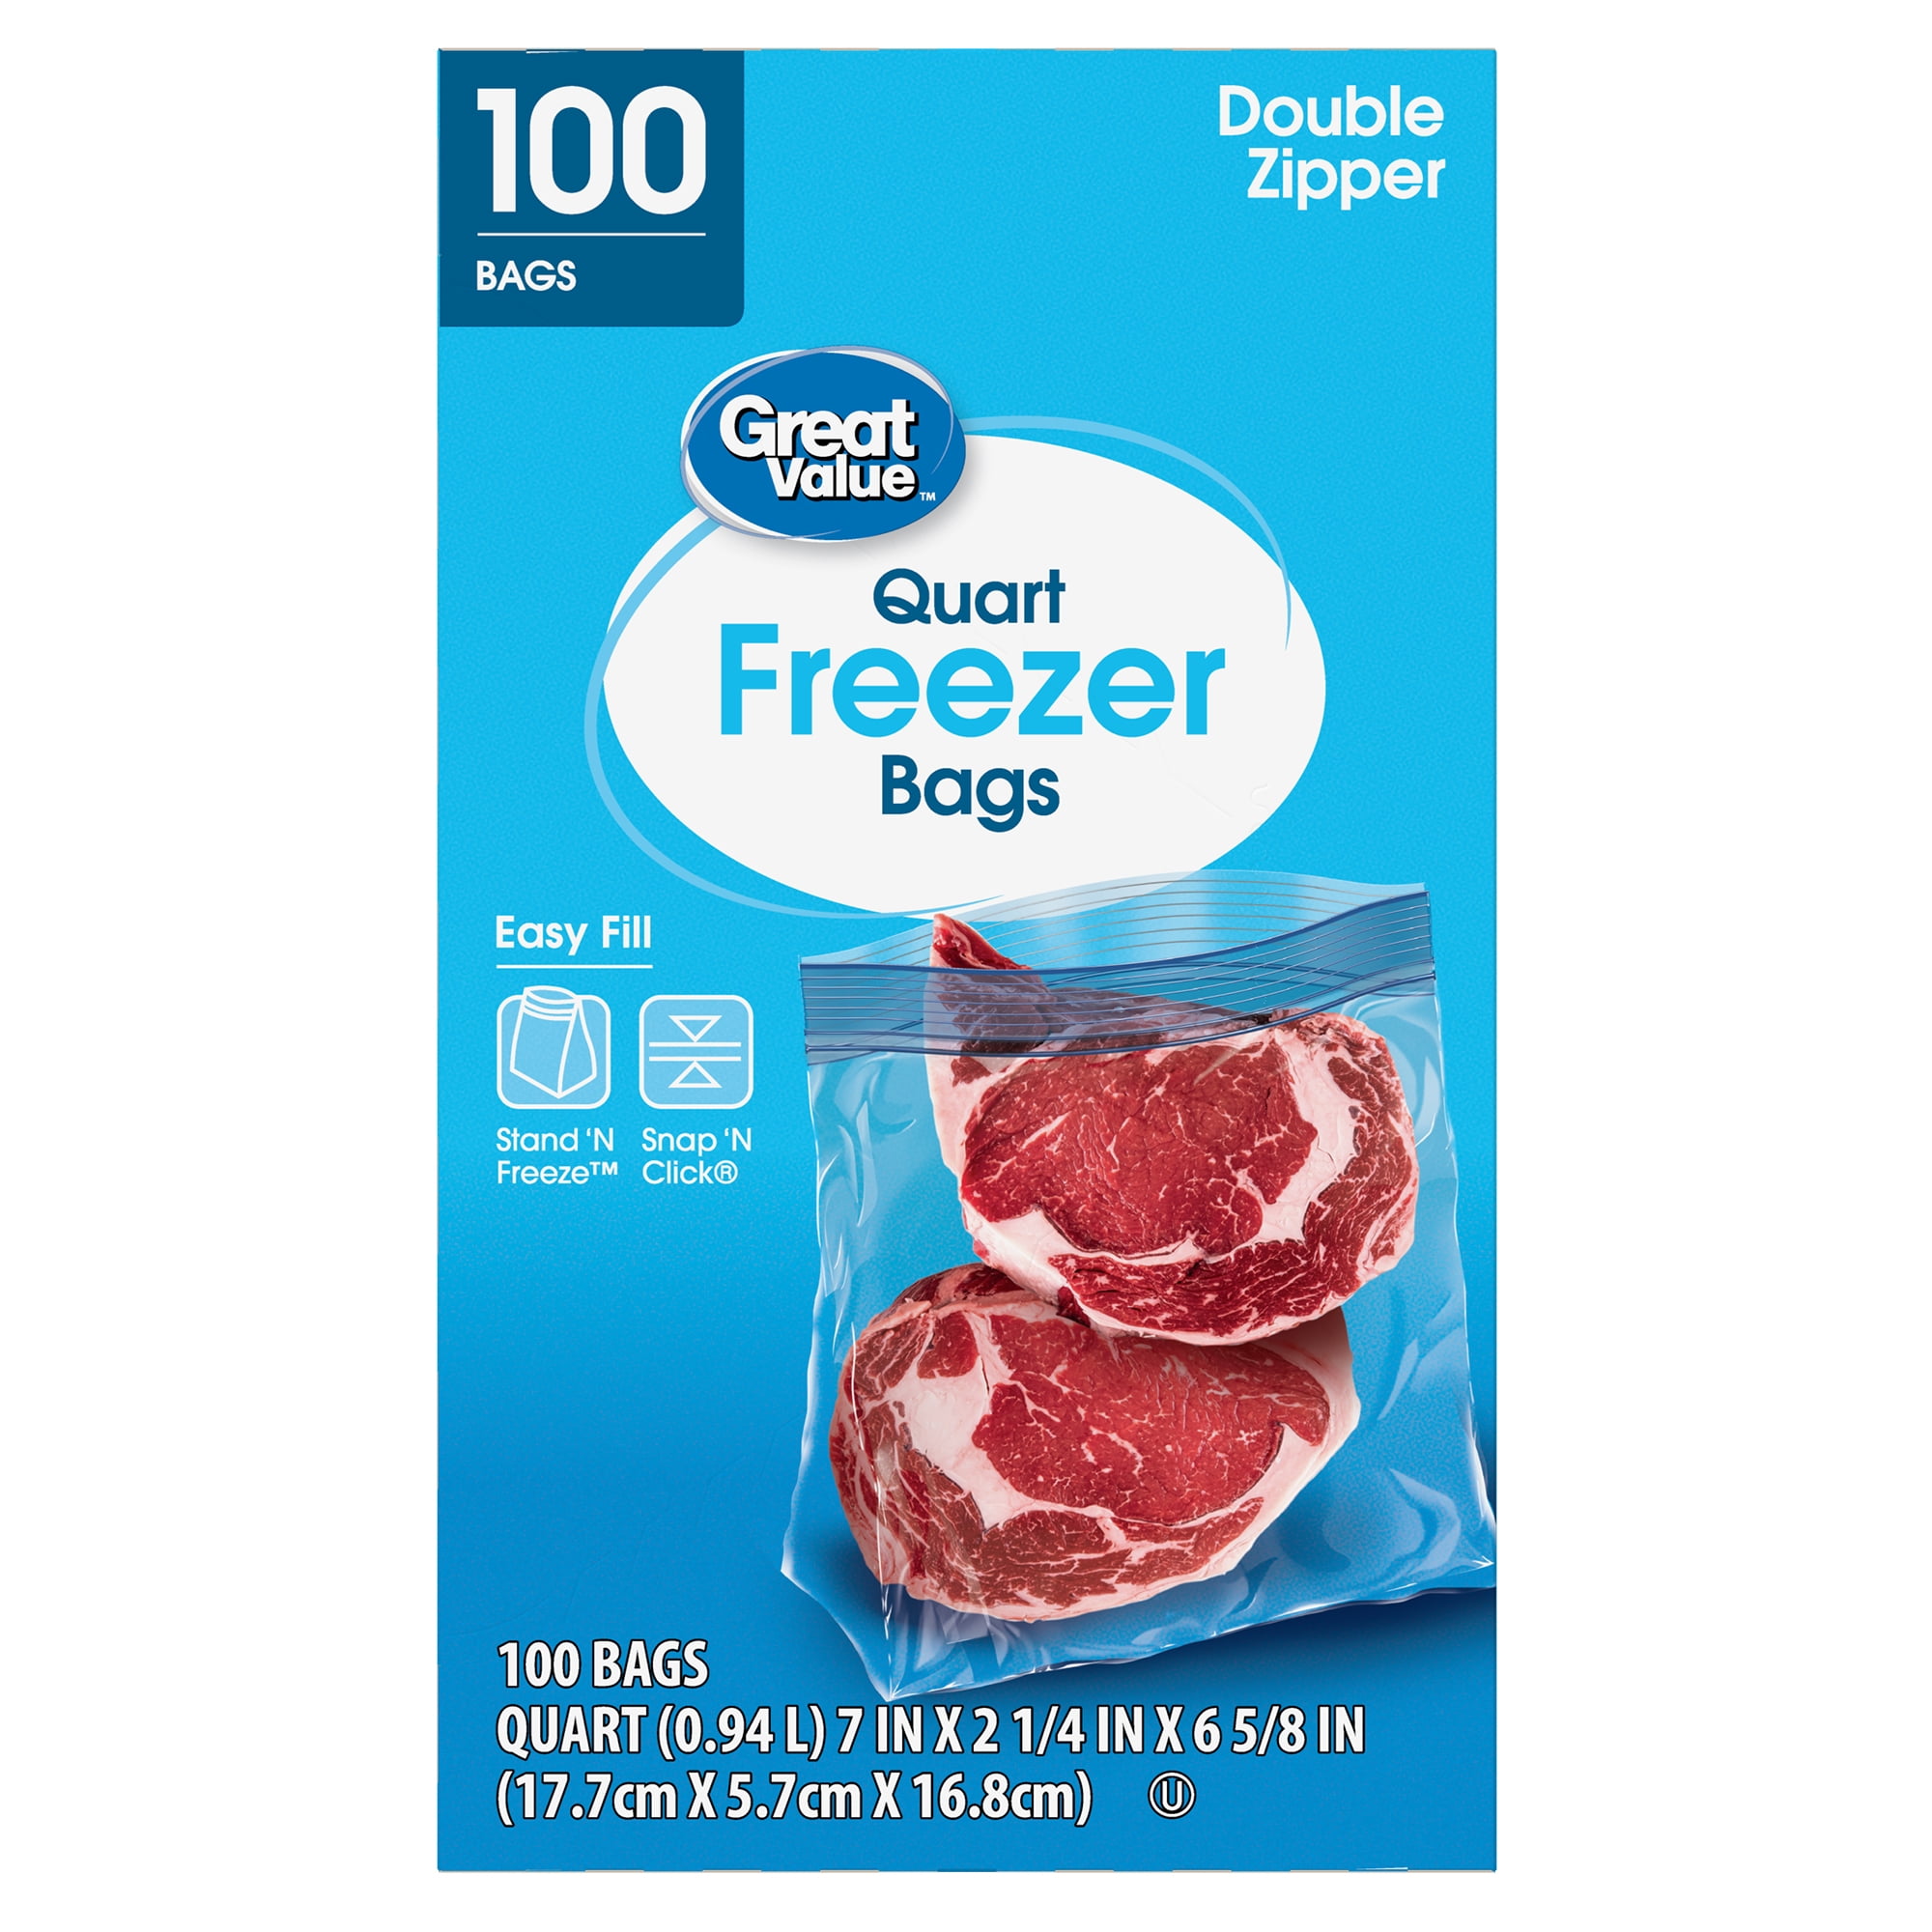 Great Value, Ziploc® Double Zipper Storage Bags, 1 Gal, 1.75 Mil, 10.56 X  10.75, Clear, 250/Box by SC JOHNSON